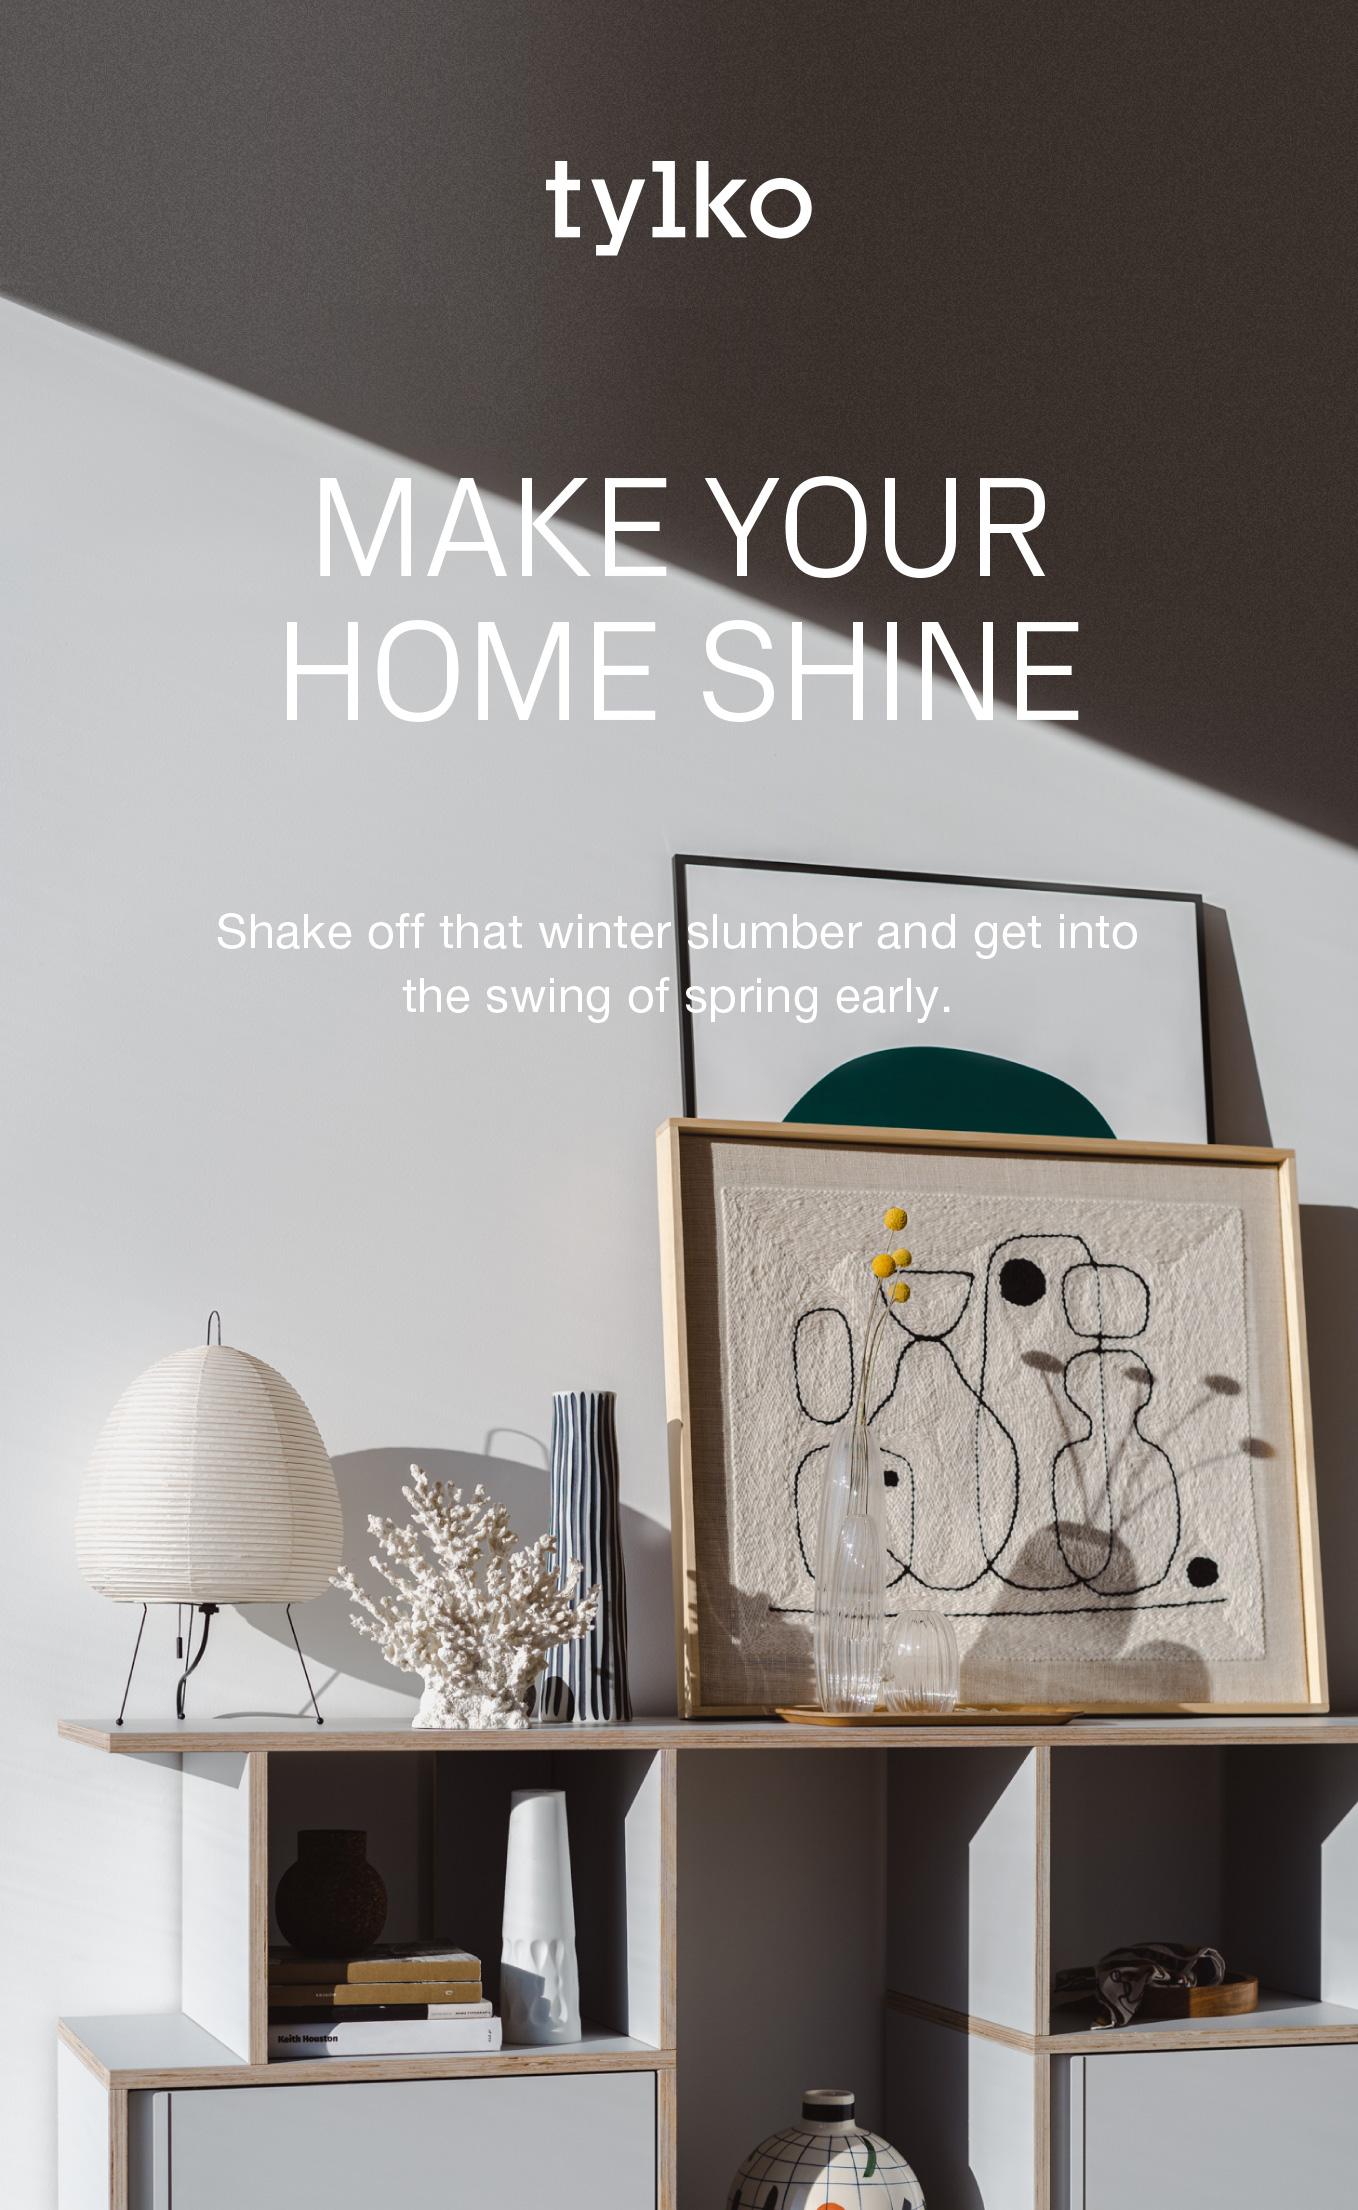 Make your home shine. Shake off that winter slumber and get into the swing of spring early.